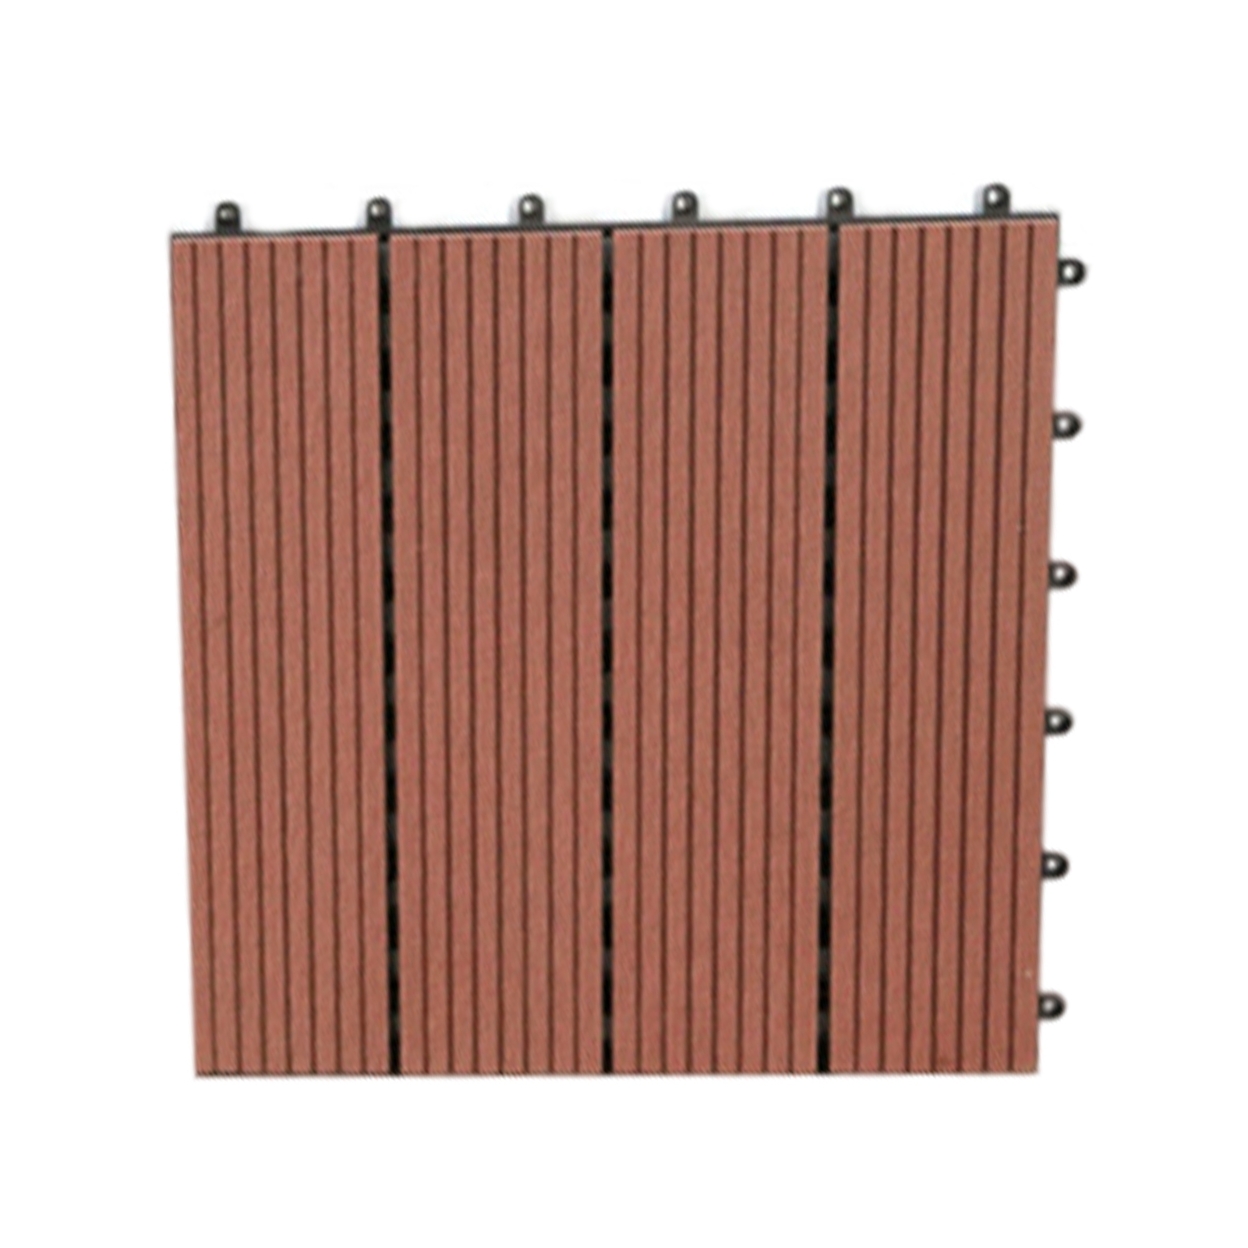 Wan 1Pc Convenient Floor Tile Flame Retardant Eco-friendly Waterproof Easy Installation Plastic Tile for Home - brown